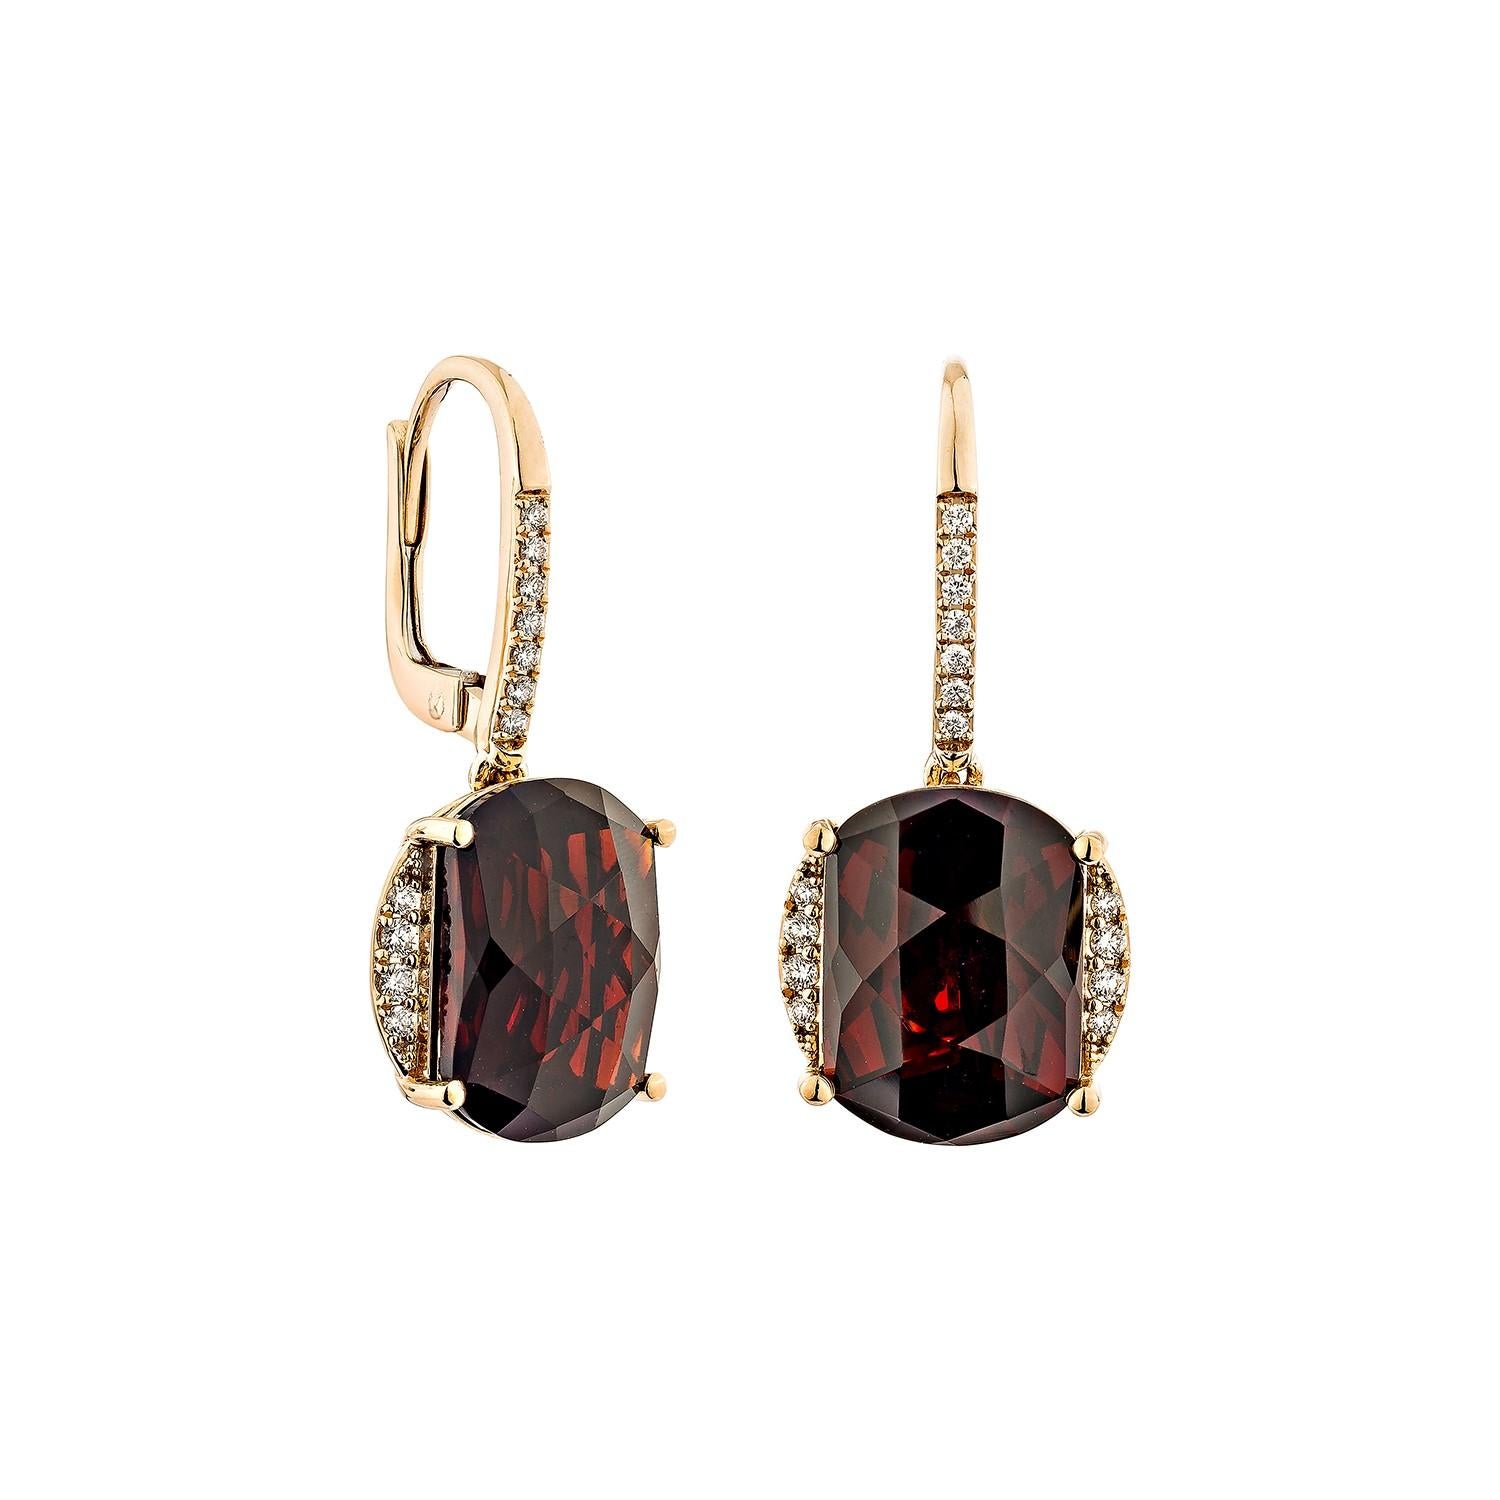 Introducing a new Drop Earrings style that embodies luxury, fashion, and personal flair. These Earrings symbolize success, love, and importance. The collection has antique Drop earrings. A standout piece features a Garnet earrings with diamonds